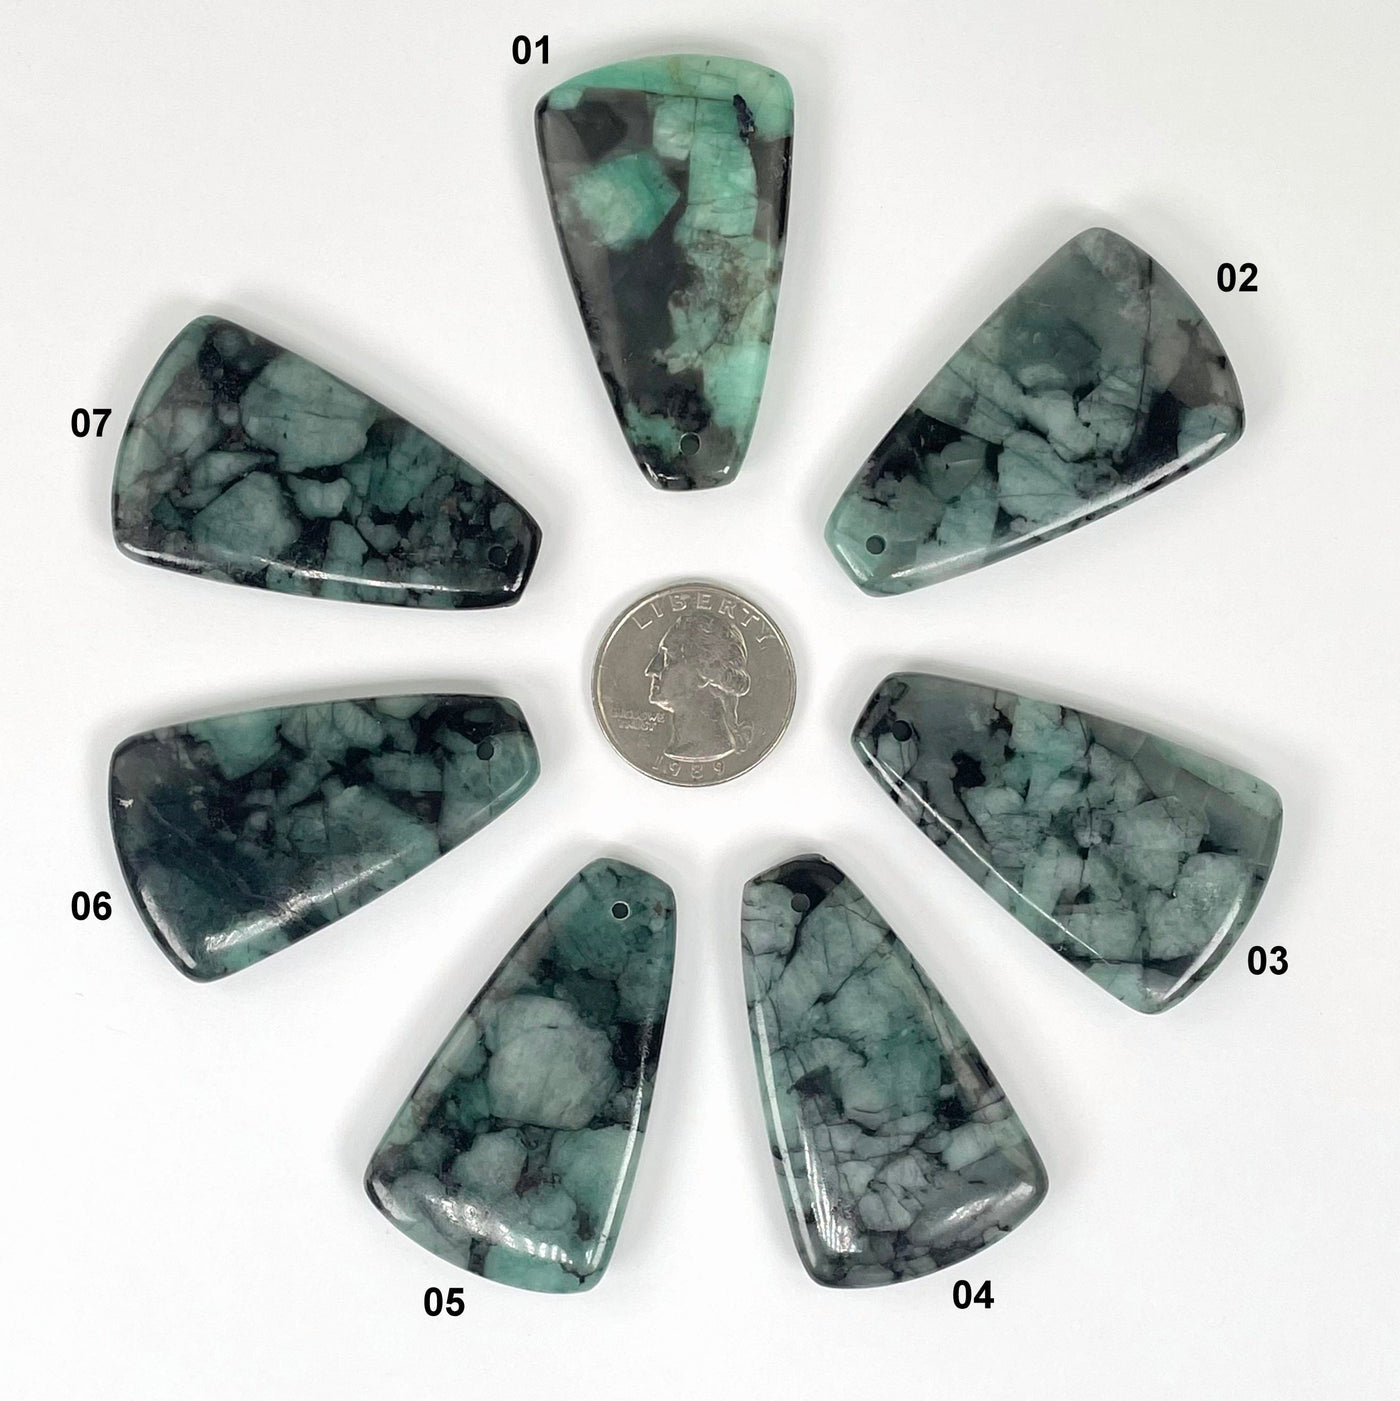 all emerald polished point options with quarter for size reference